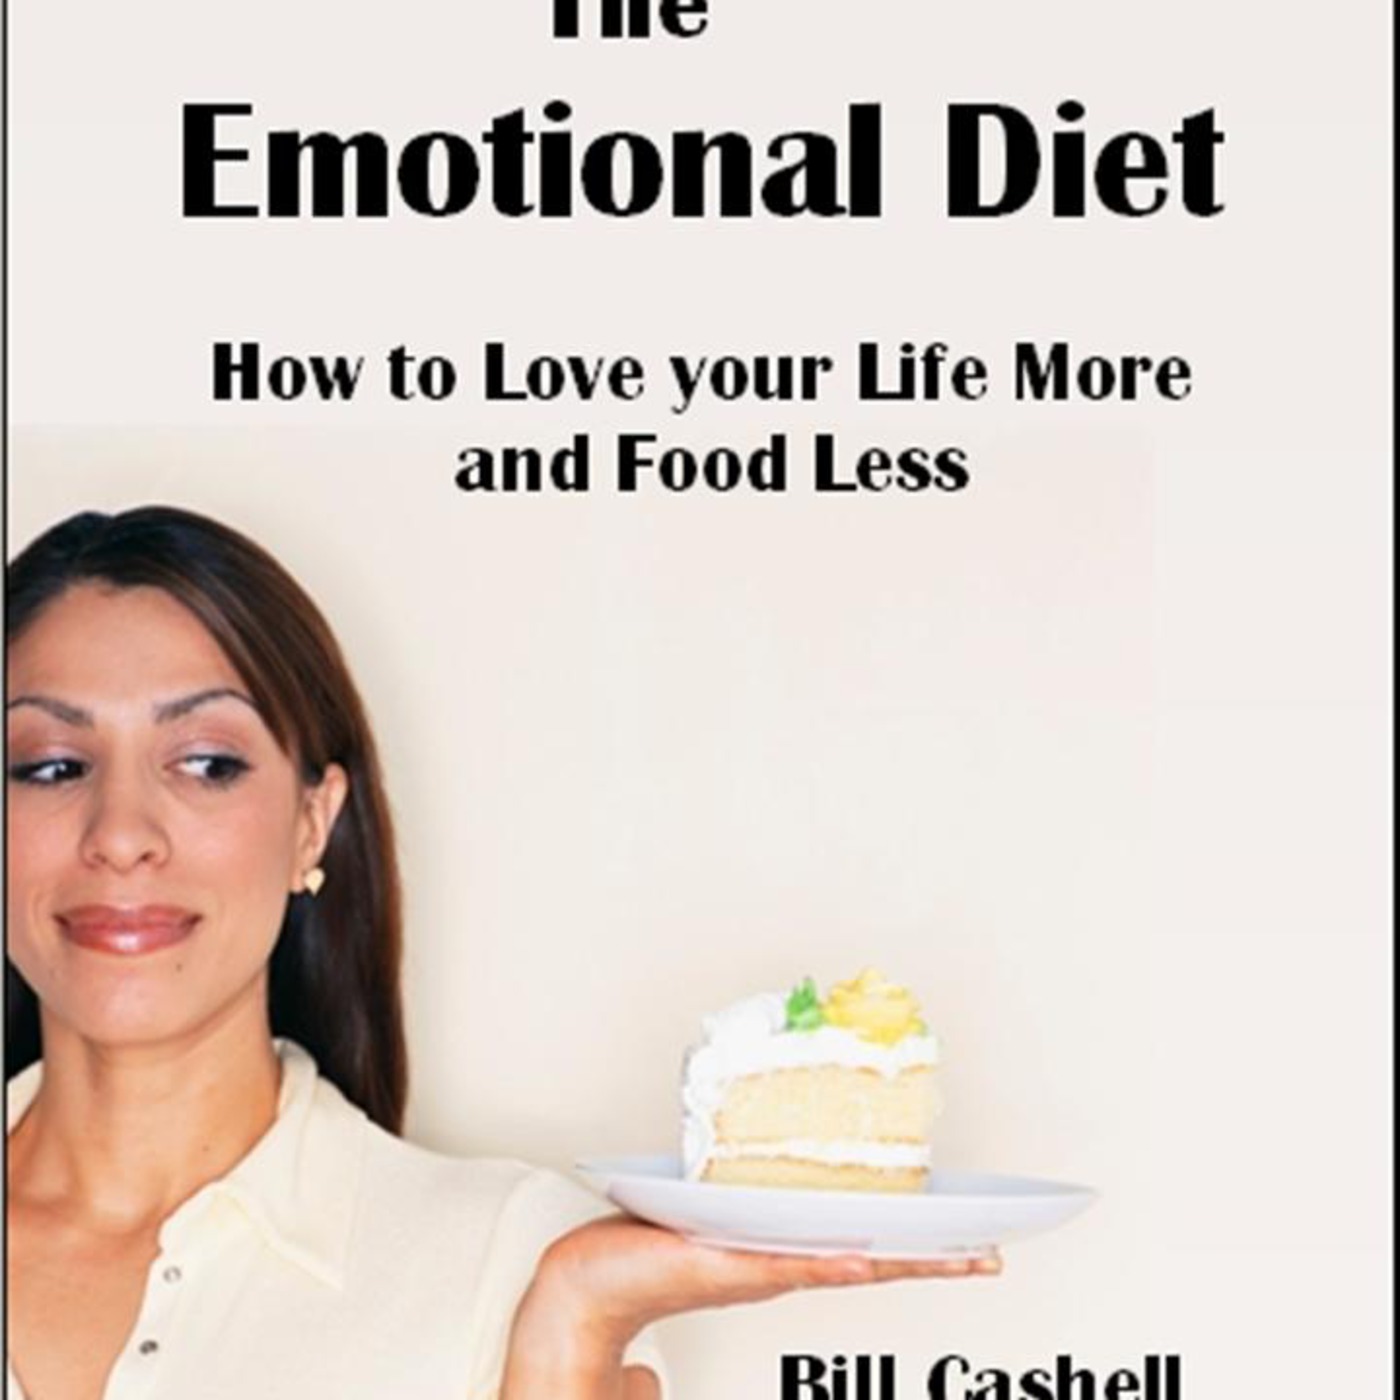 Emotional Diet Weight Loss Podcast